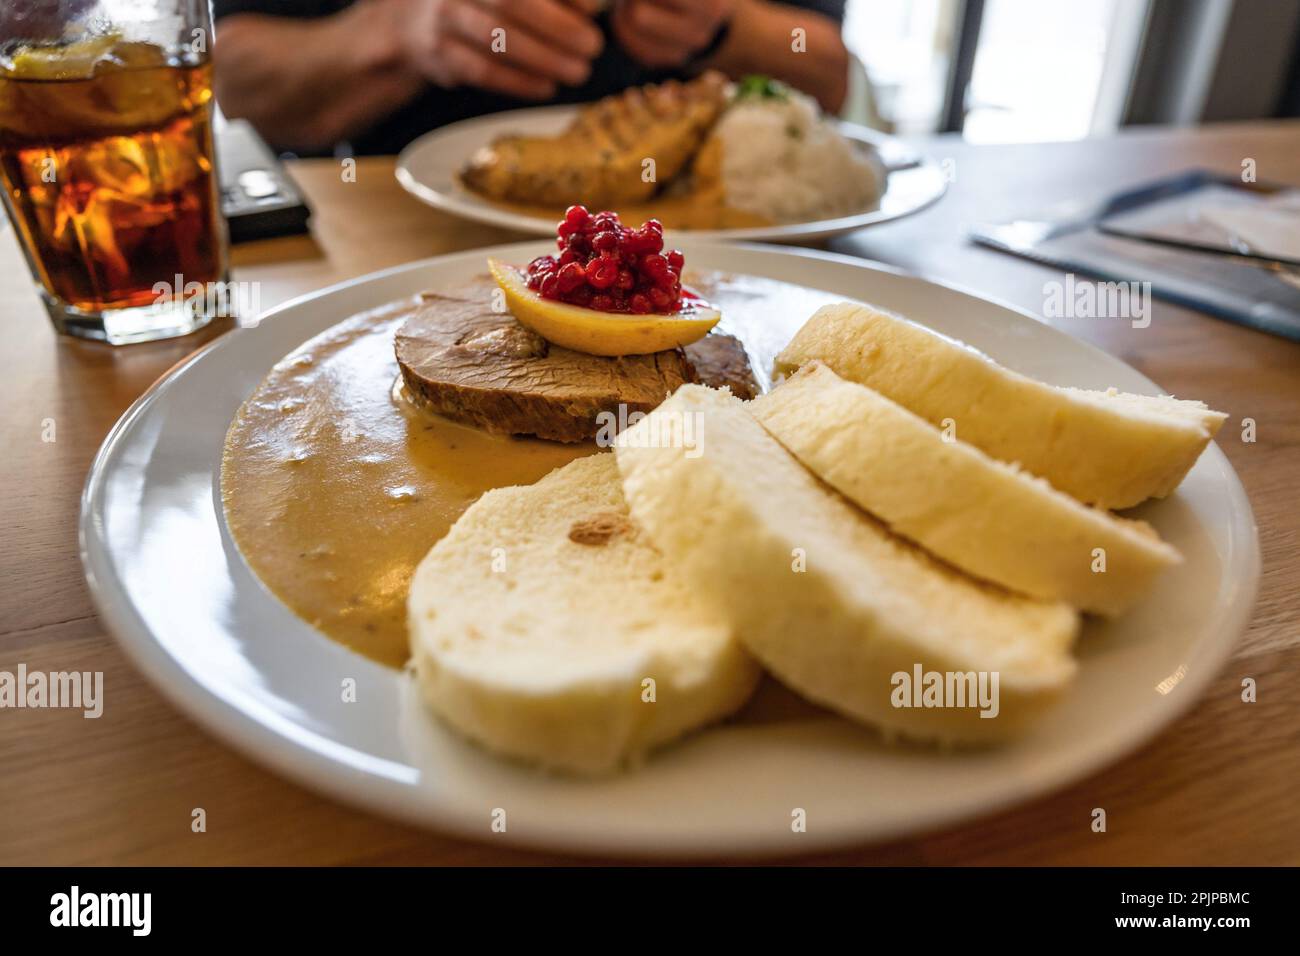 Dumpling with sirloin sauce (traditional Czech food 'svickova') with cranberry and beef fillet on plate, lemonade, part of eating man, restaurant. Stock Photo